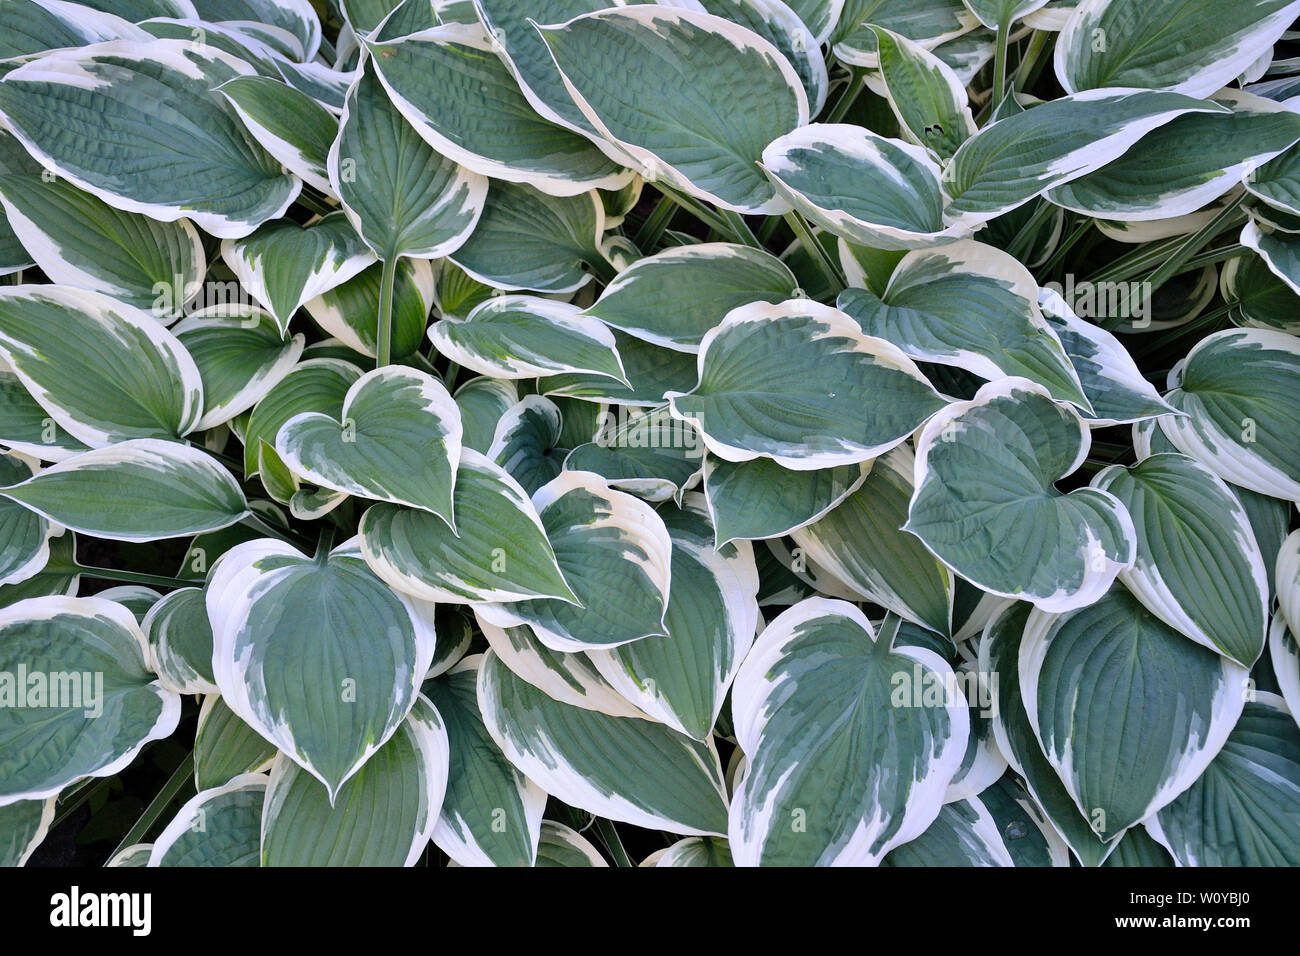 Decorative plant Hosta Patriot (most popular) with variegated green with white  leaves for landscaping design in park or garden. Stock Photo